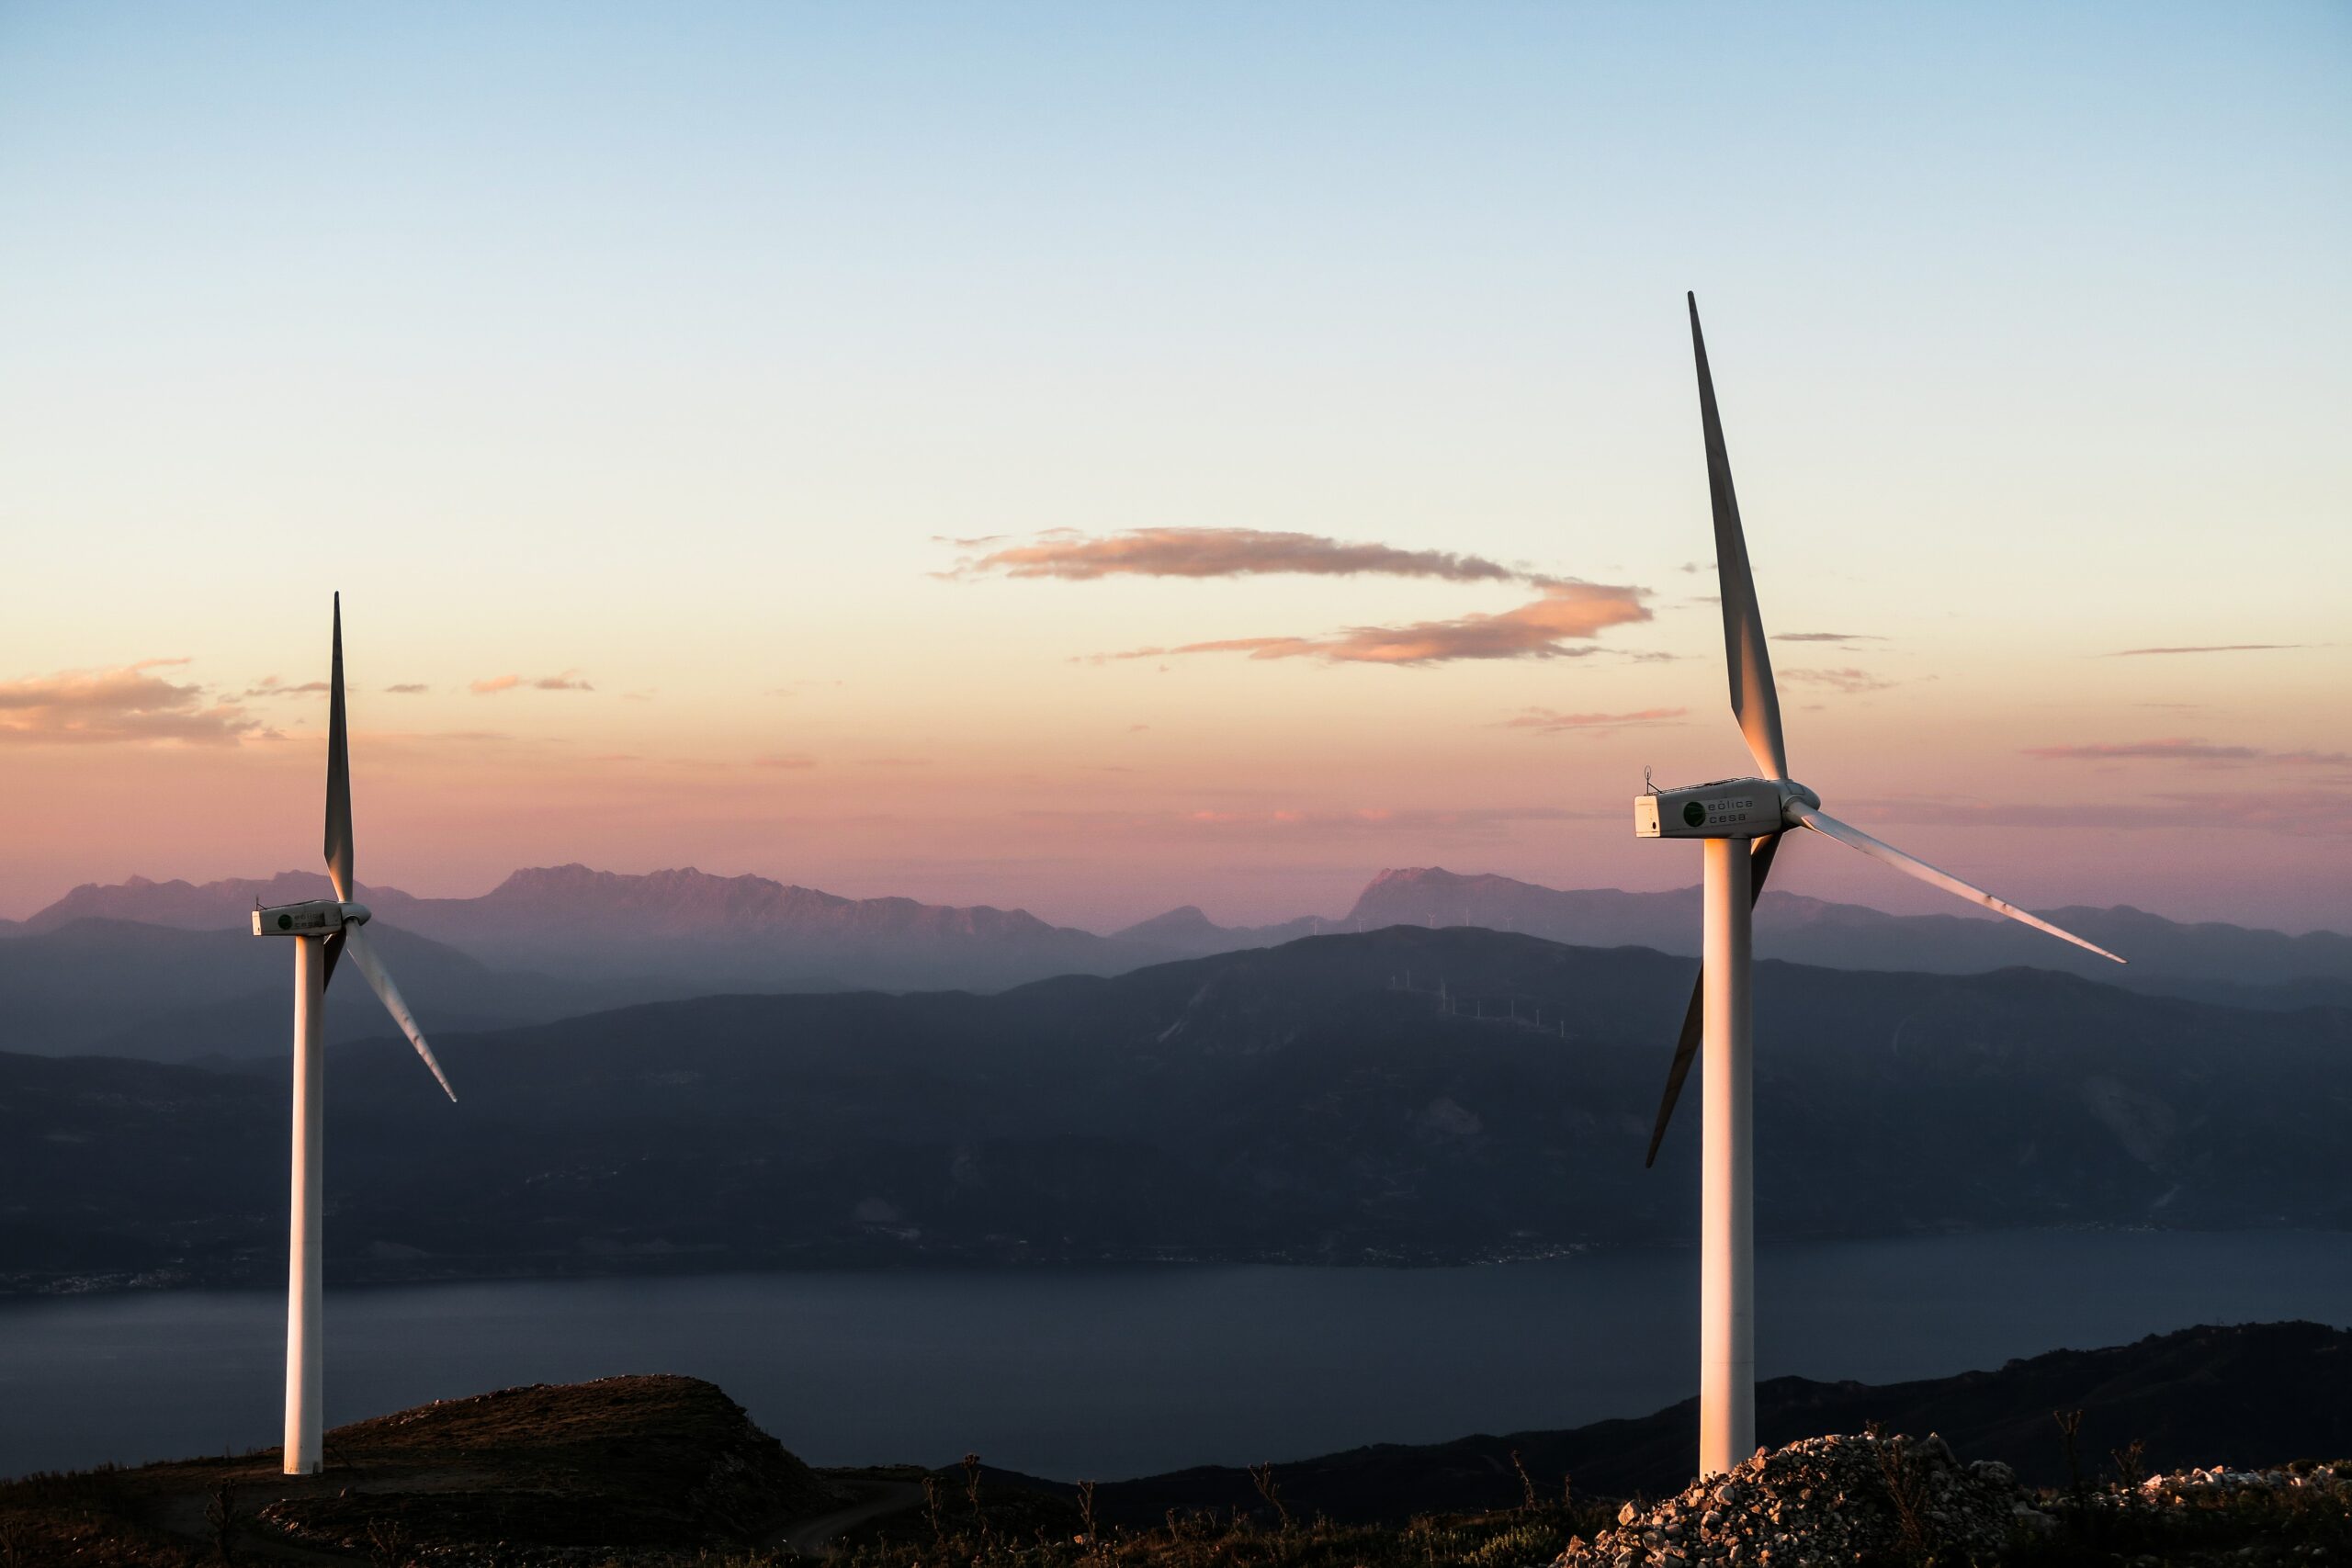 This image depicts two wind turbines situated on top of a mountain. The turbines are likely generating renewable energy from the wind that blows across the mountain. The image aligns with our company's shared goal of enabling a better future for all by promoting the use of clean energy sources that reduce our dependence on fossil fuels and mitigate the harmful effects of climate change. Wind turbines are one of many technologies that can help us transition to a more sustainable and environmentally-friendly energy system.